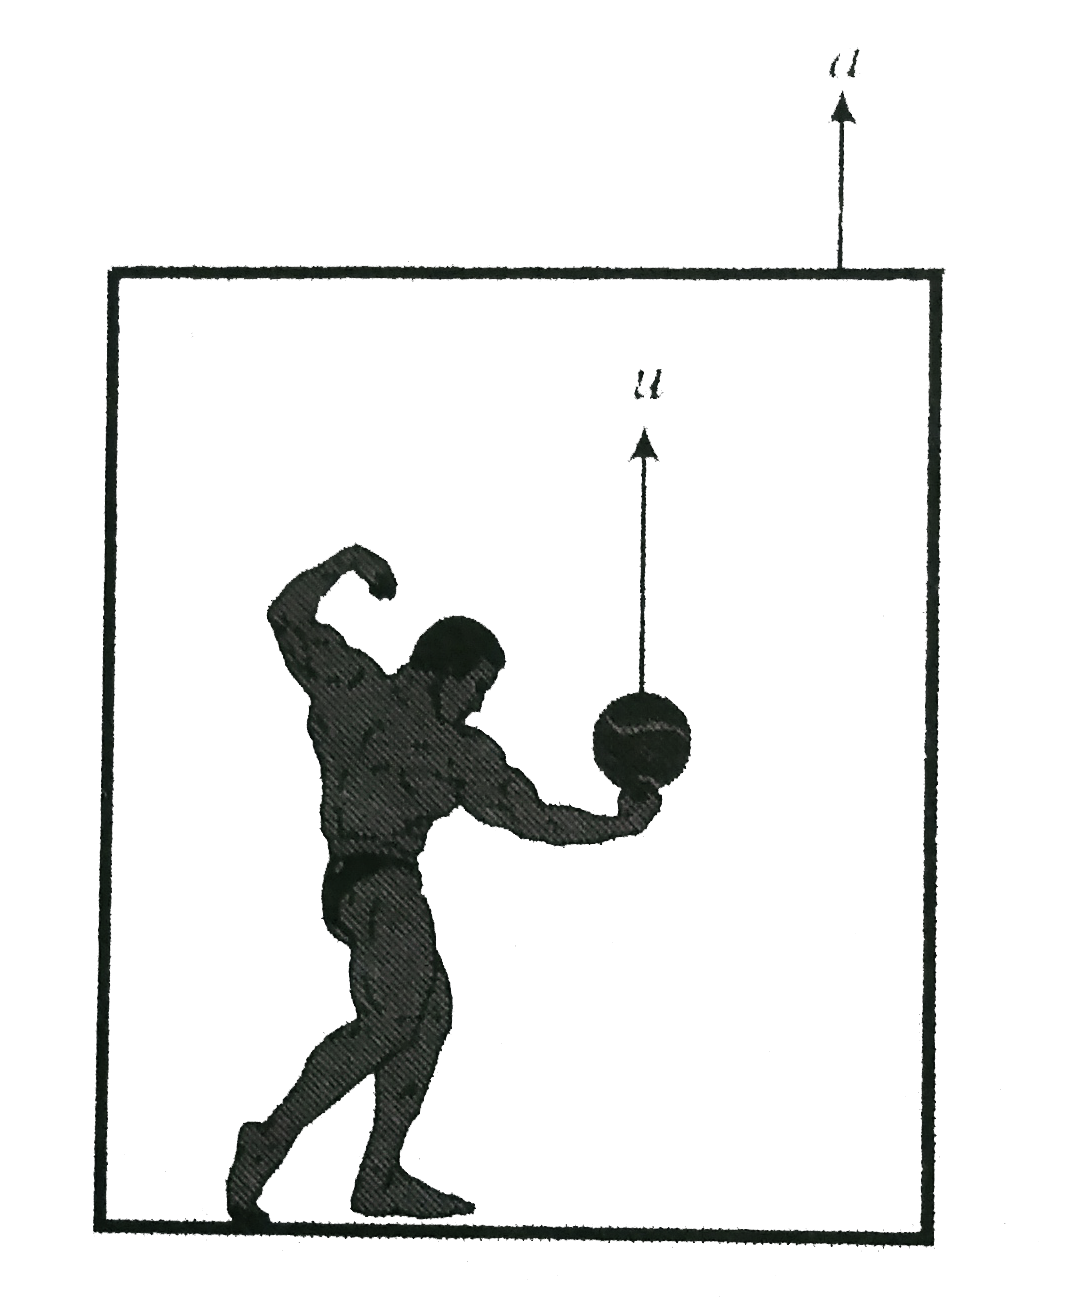 A lift is moving up with acceleration a A person inside the ligt throws the ball upwards with a velocity u relativeto hand.   a. What is the time of flight of the ball?   b. What is the maximum height reached by the ball in the lift?